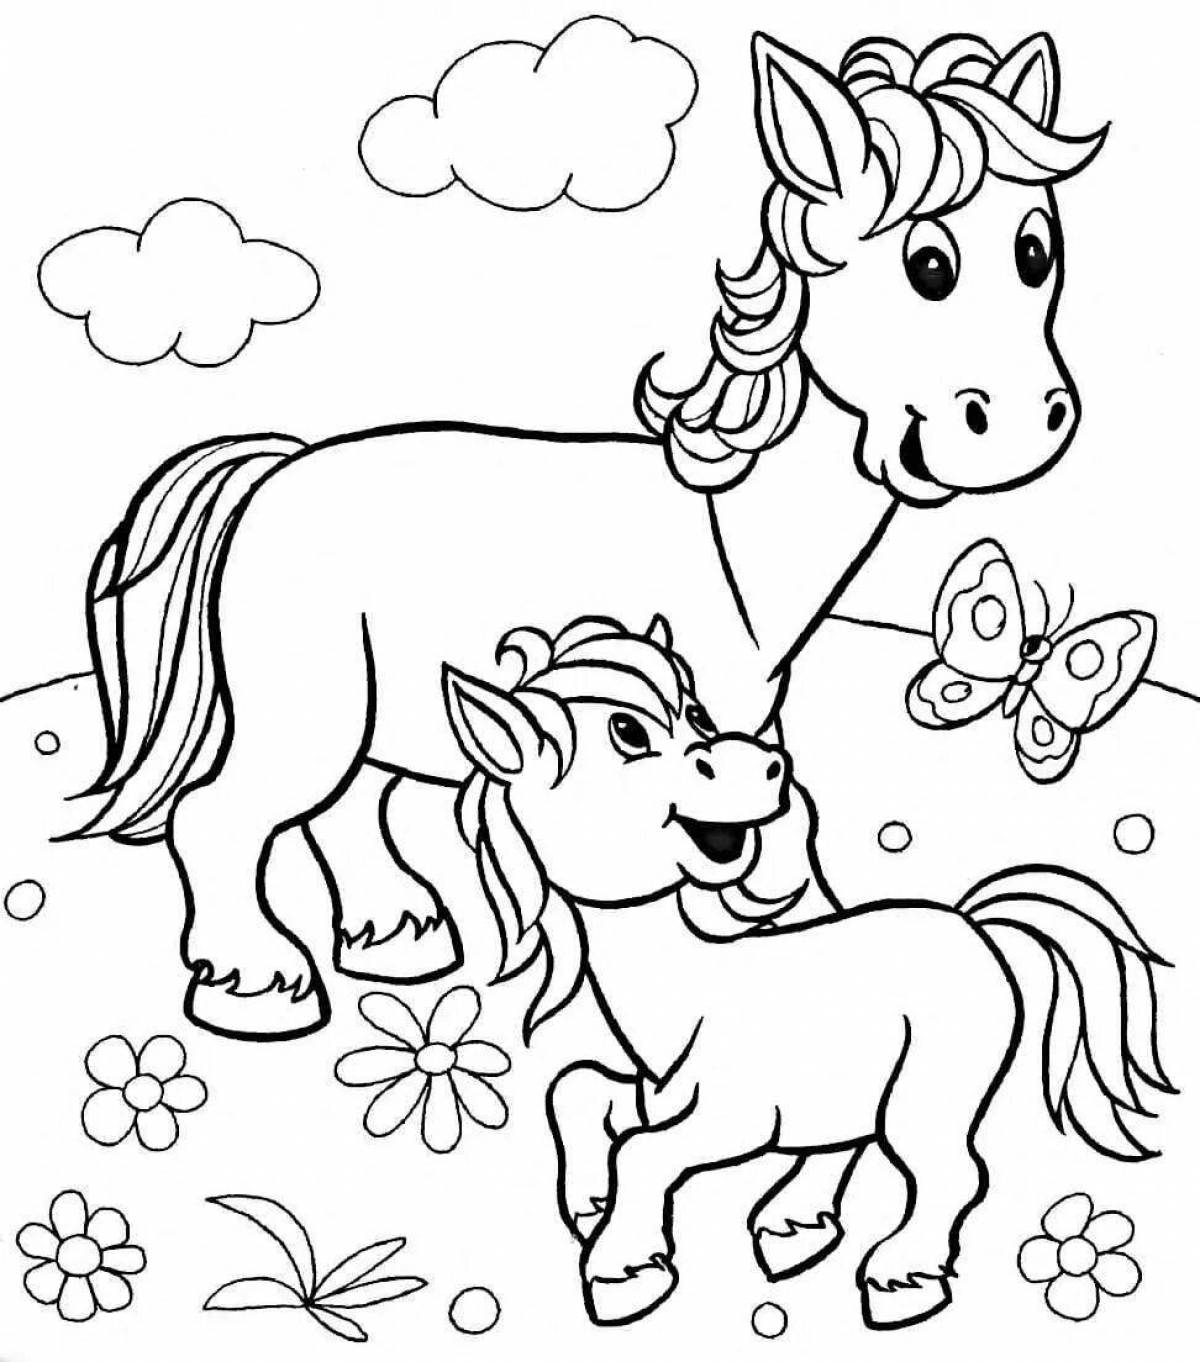 Fun pet coloring pages for kids